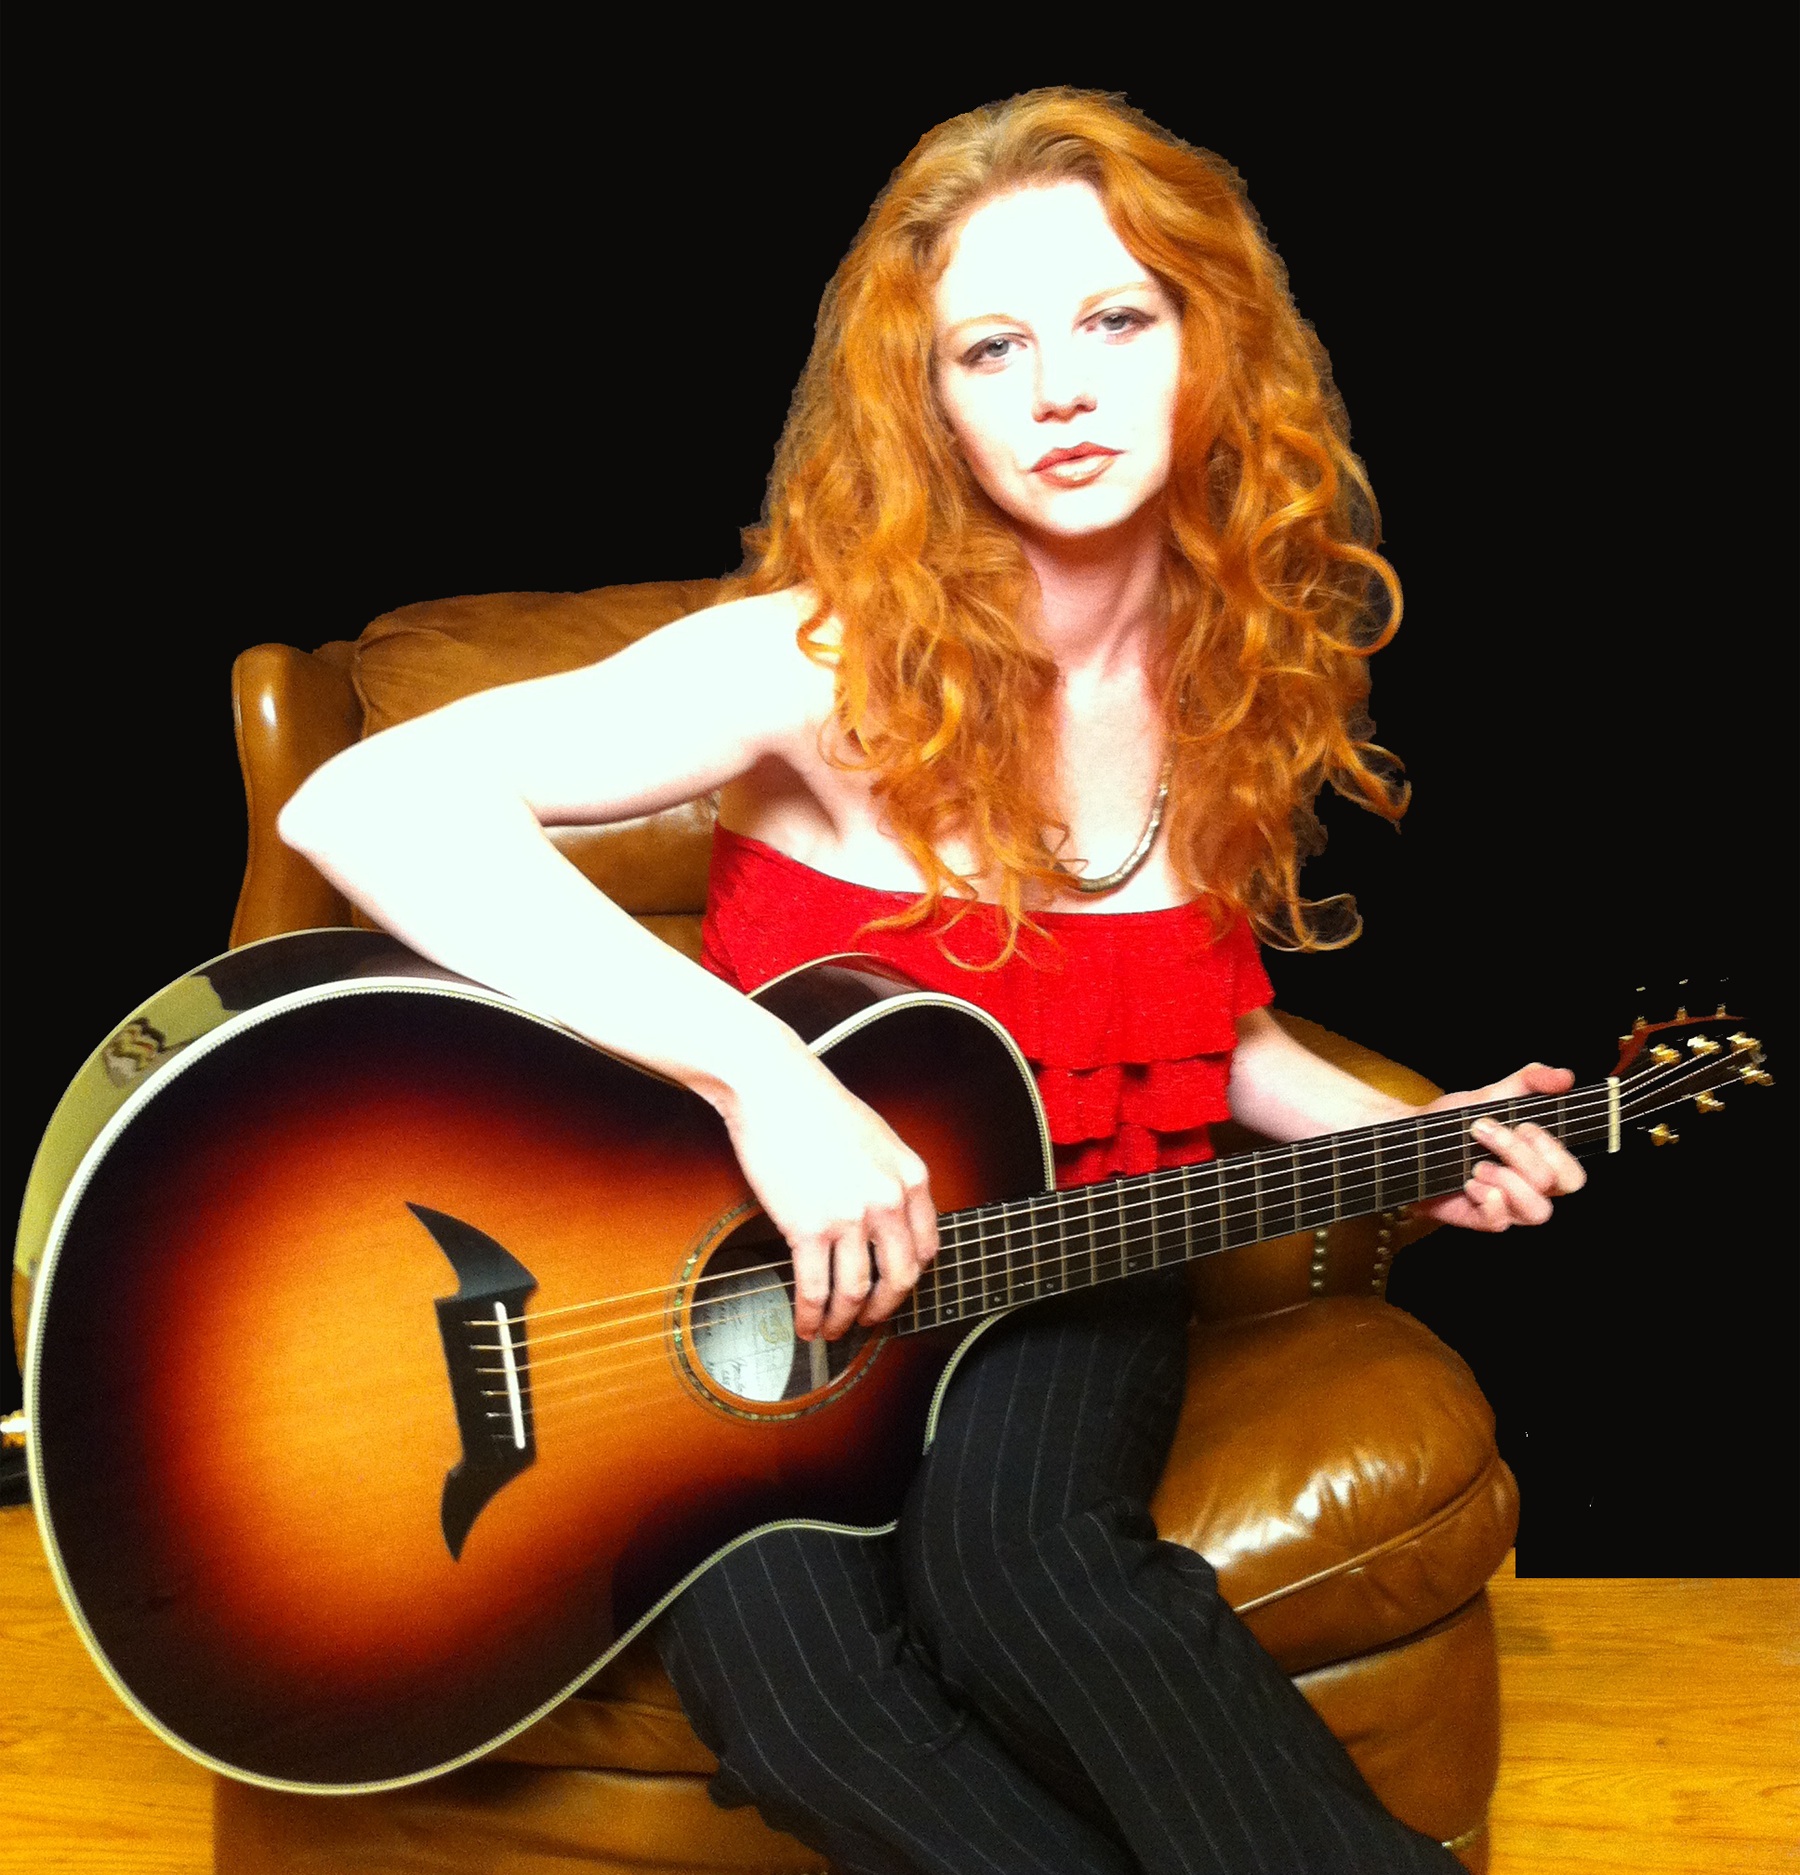 Amanda Williams, Grammy nominated Songwriter, Owner Songwriting and Music Business dot com/Hillbilly Culture LLC